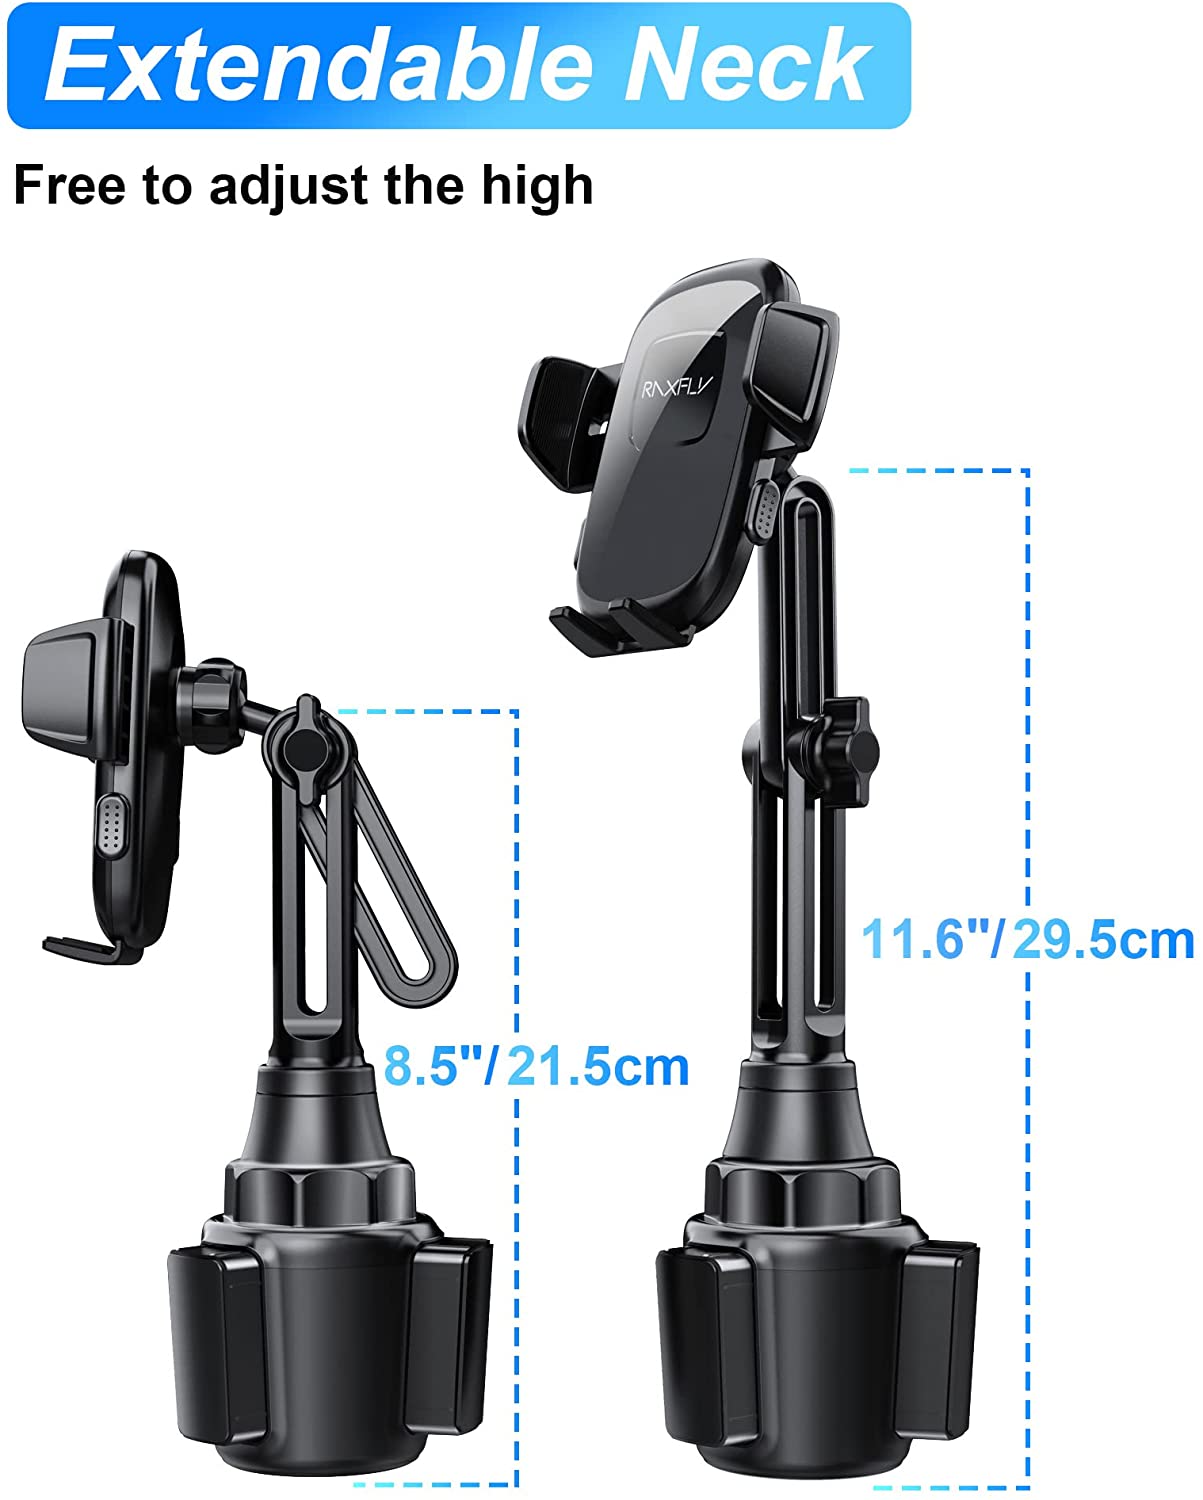 Car Phone Holder Mount Upgraded Cup Compatible with Cell Phones